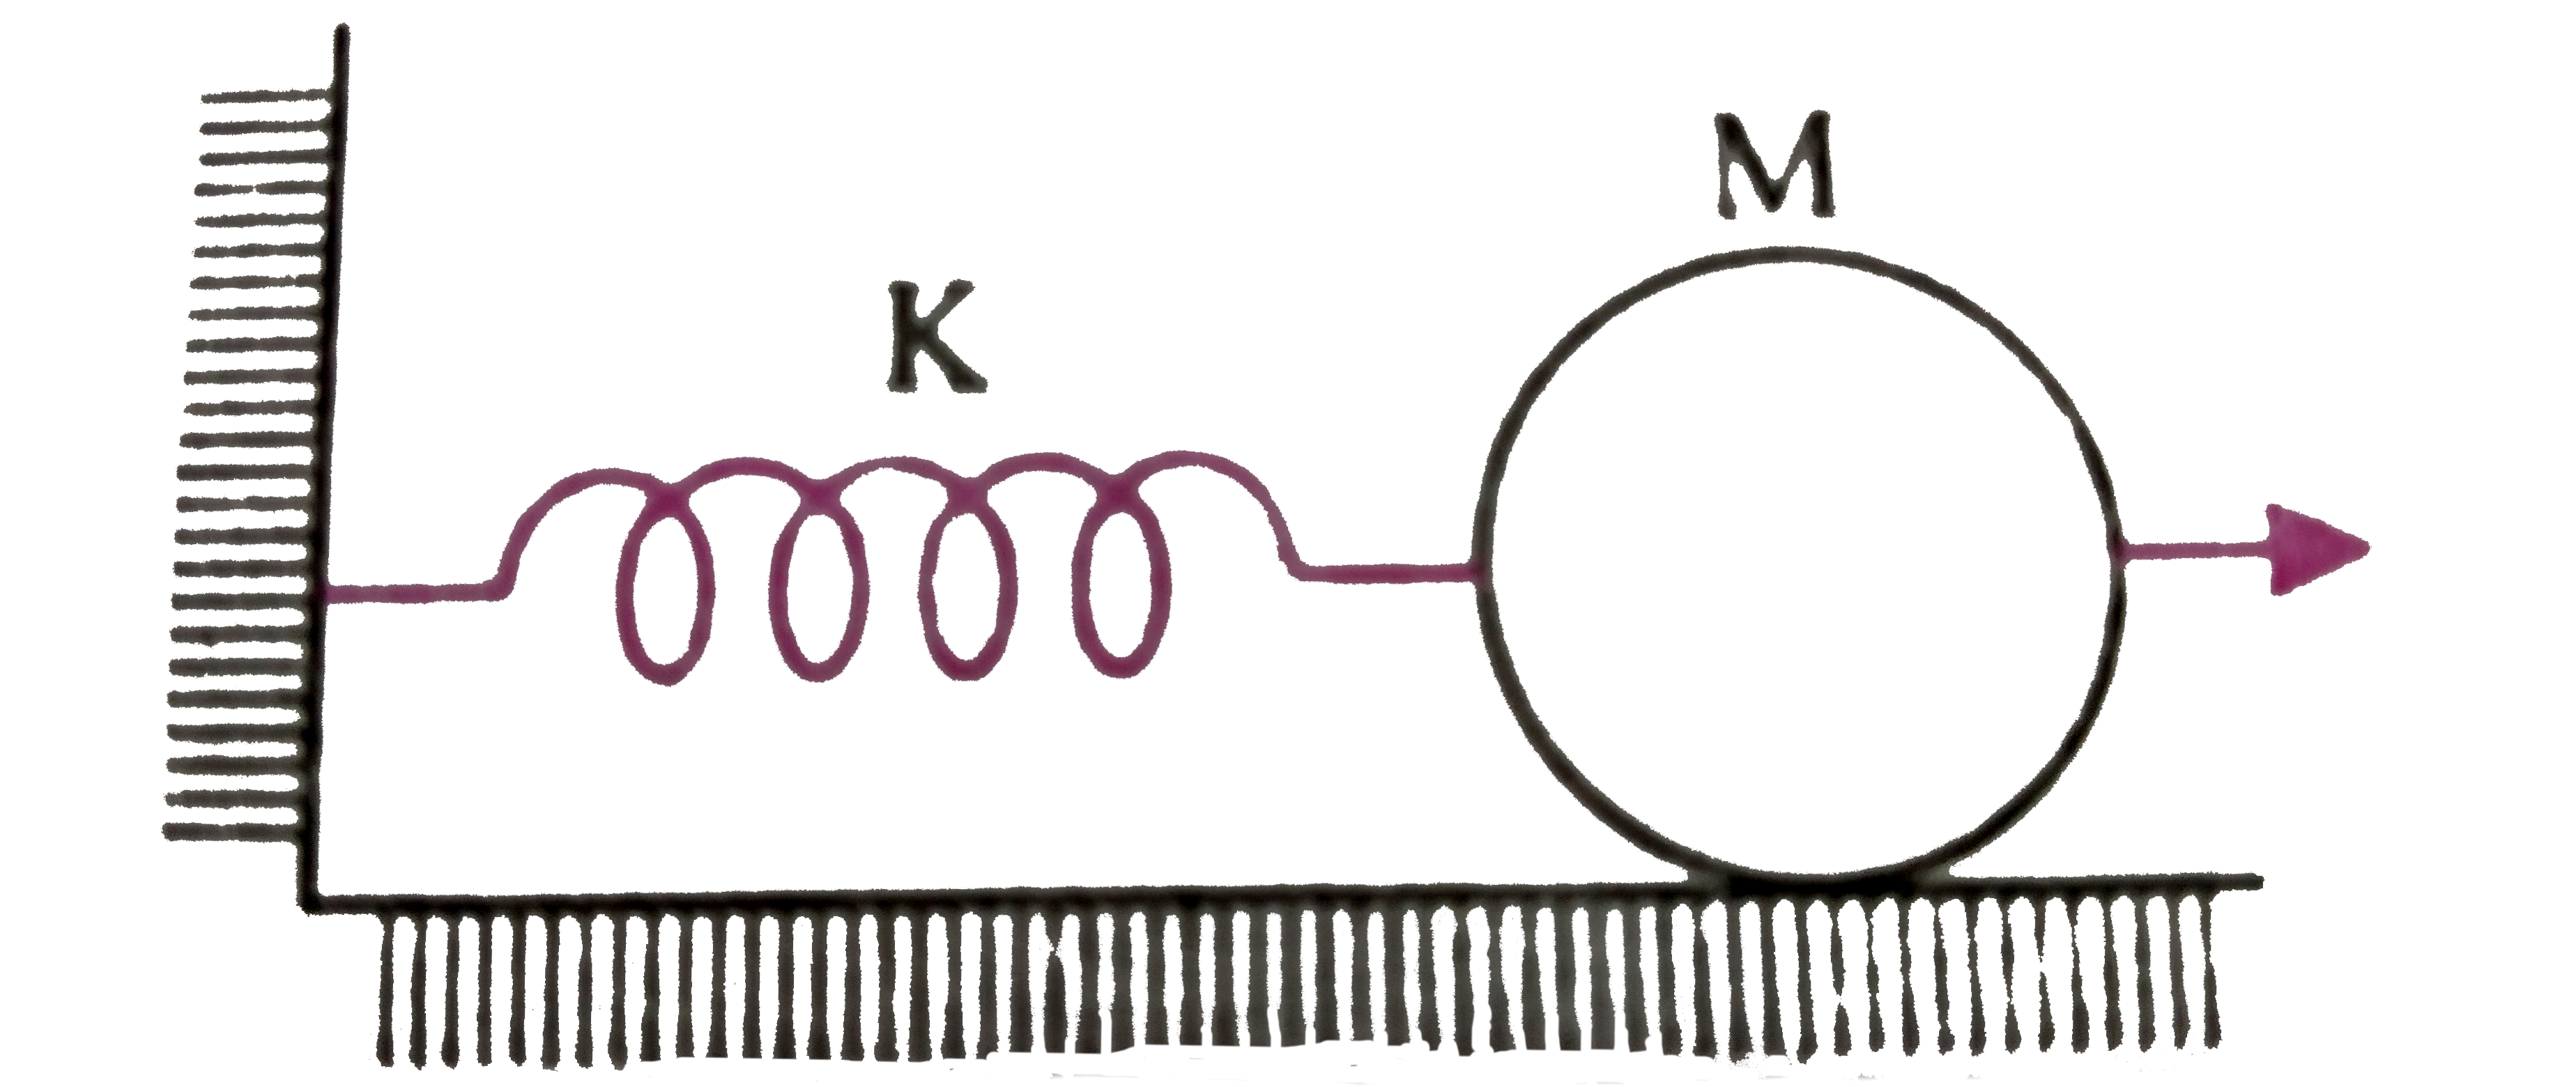 A disc of mass M is attached to a horizontal massless spring of force constant K so that it can roll with out slipping along a horizontal surface. If the disc is pulled a little towards right and then released, its centre of mass executes SHM with a period of